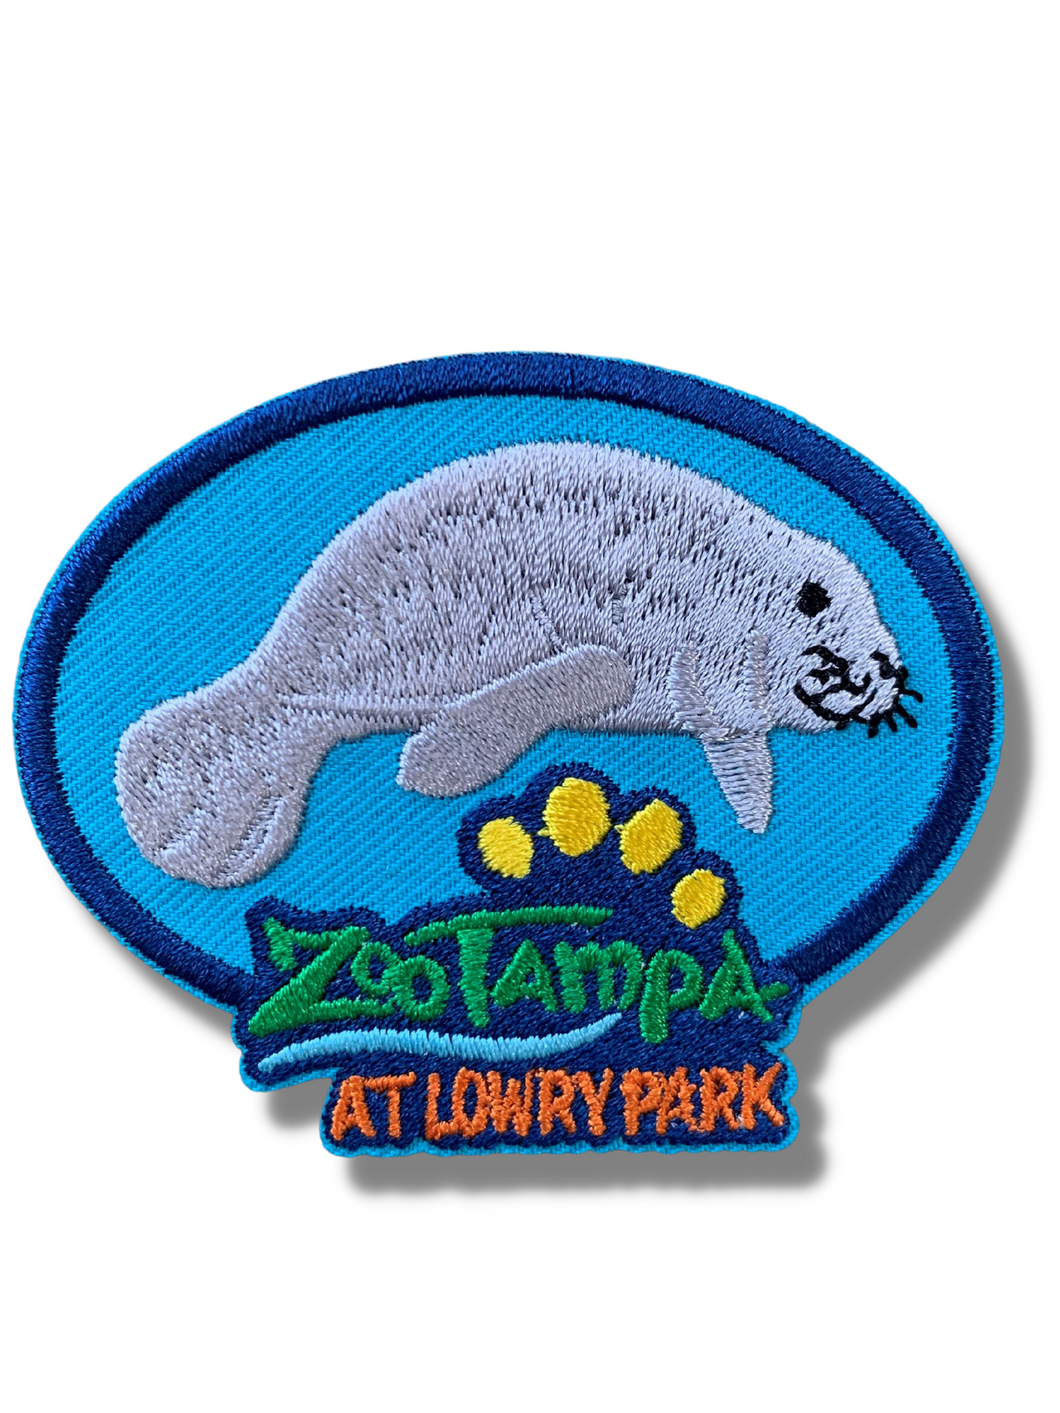 ZooTampa Patch - Manatee